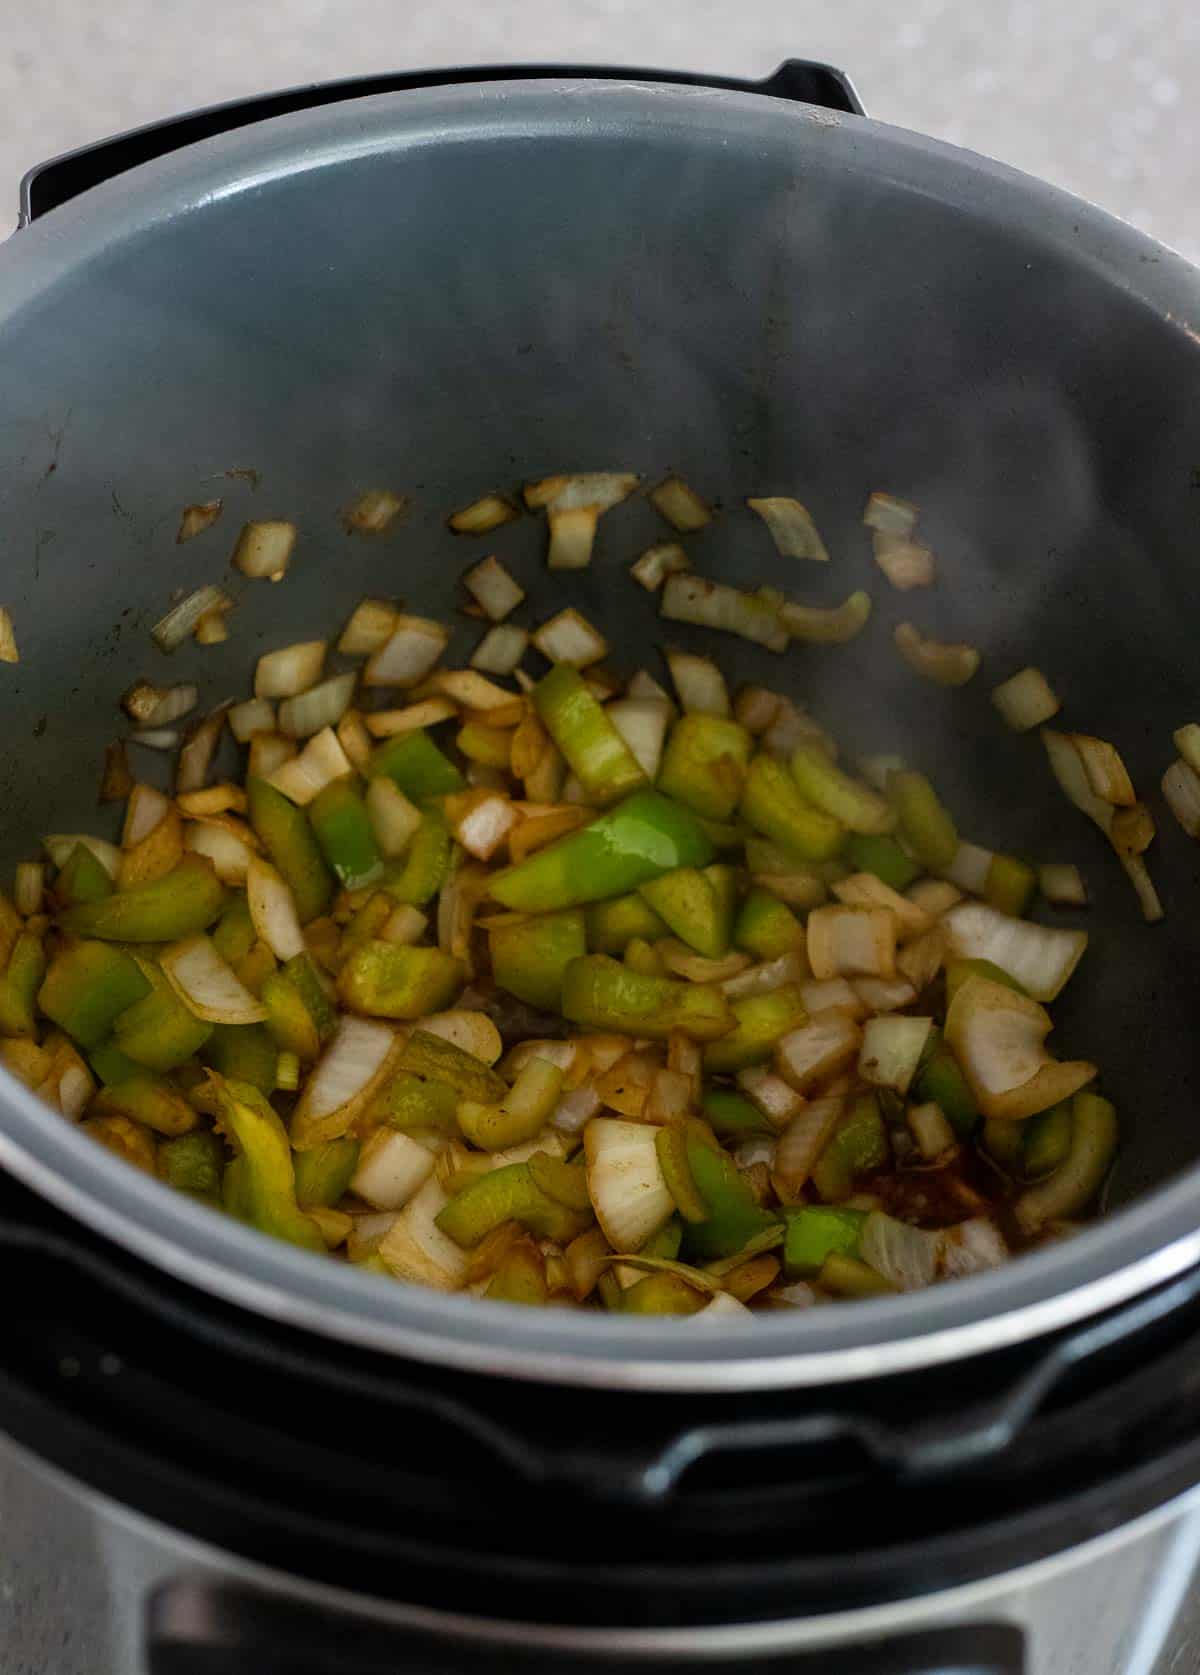 Chopped celery, onions and green peppers sautéing in the Instant Pot.